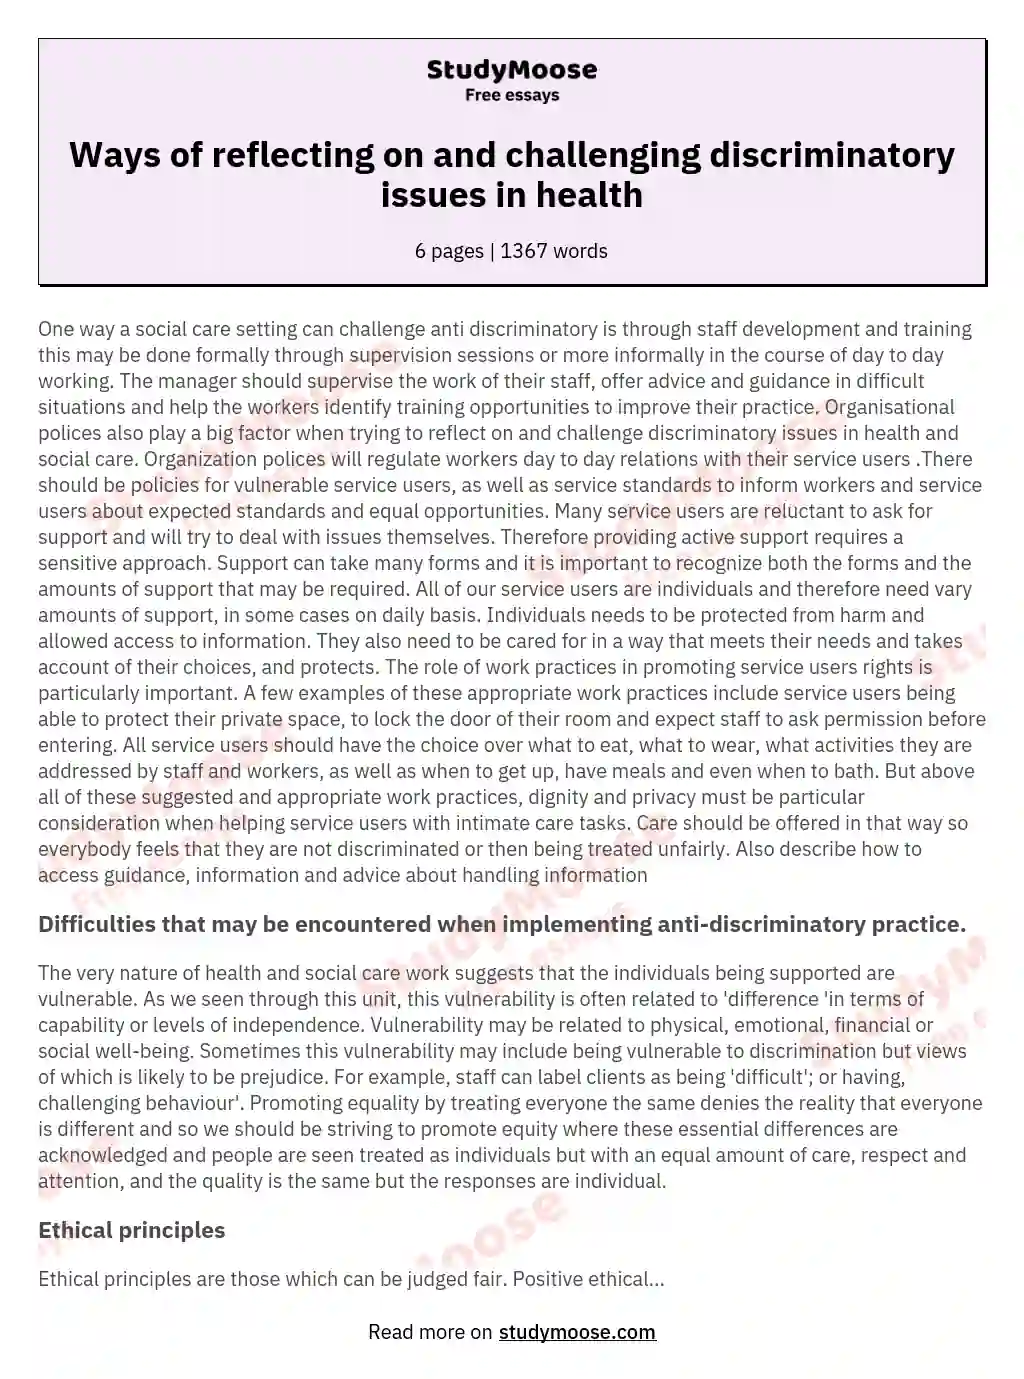 Ways of reflecting on and challenging discriminatory issues in health